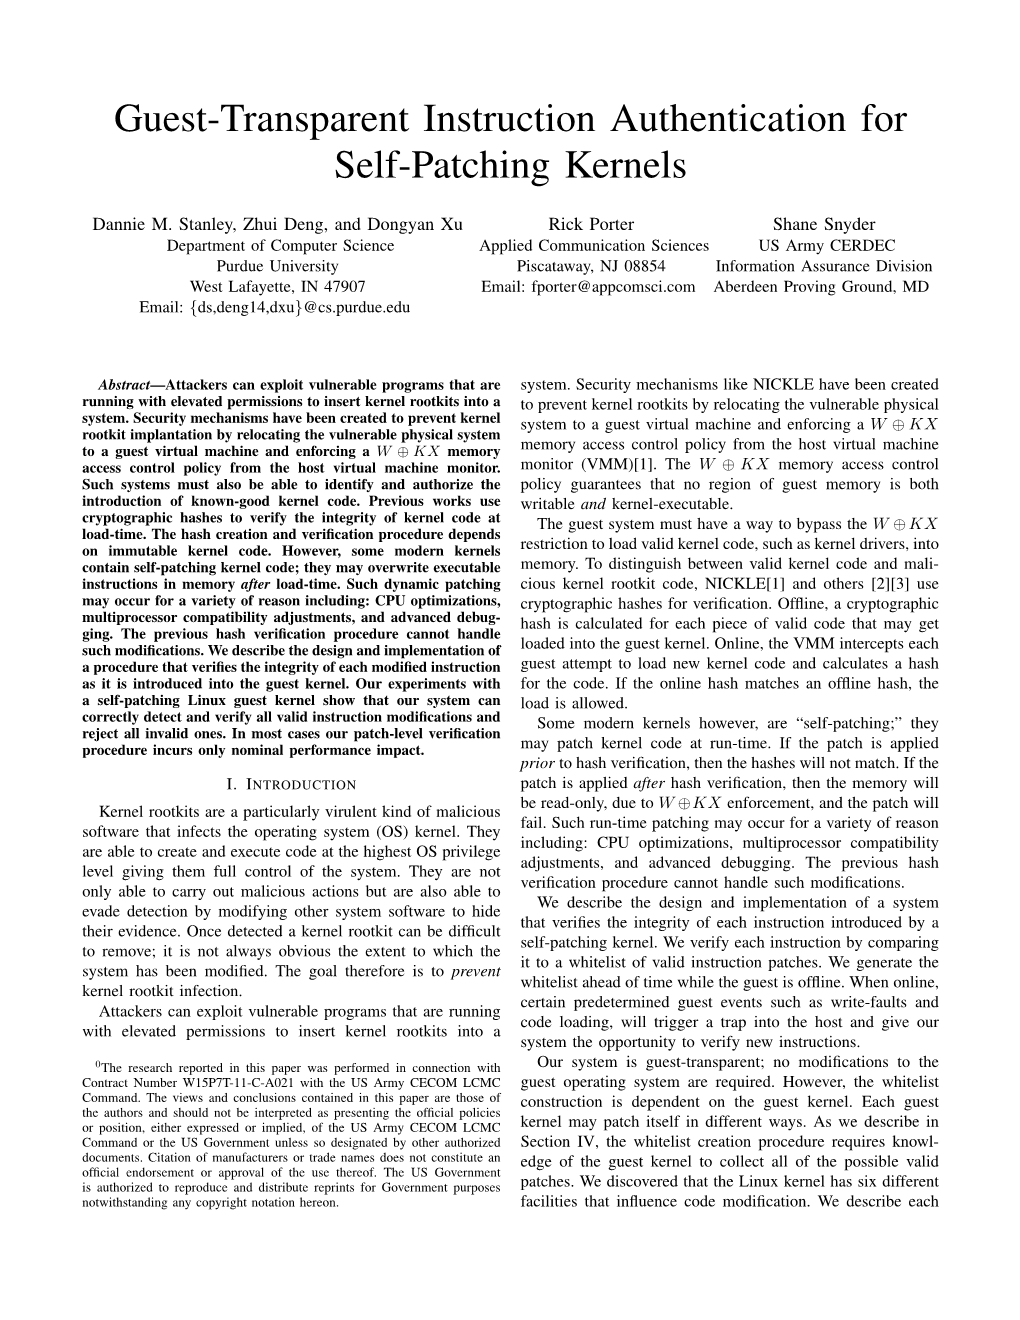 Guest-Transparent Instruction Authentication for Self-Patching Kernels